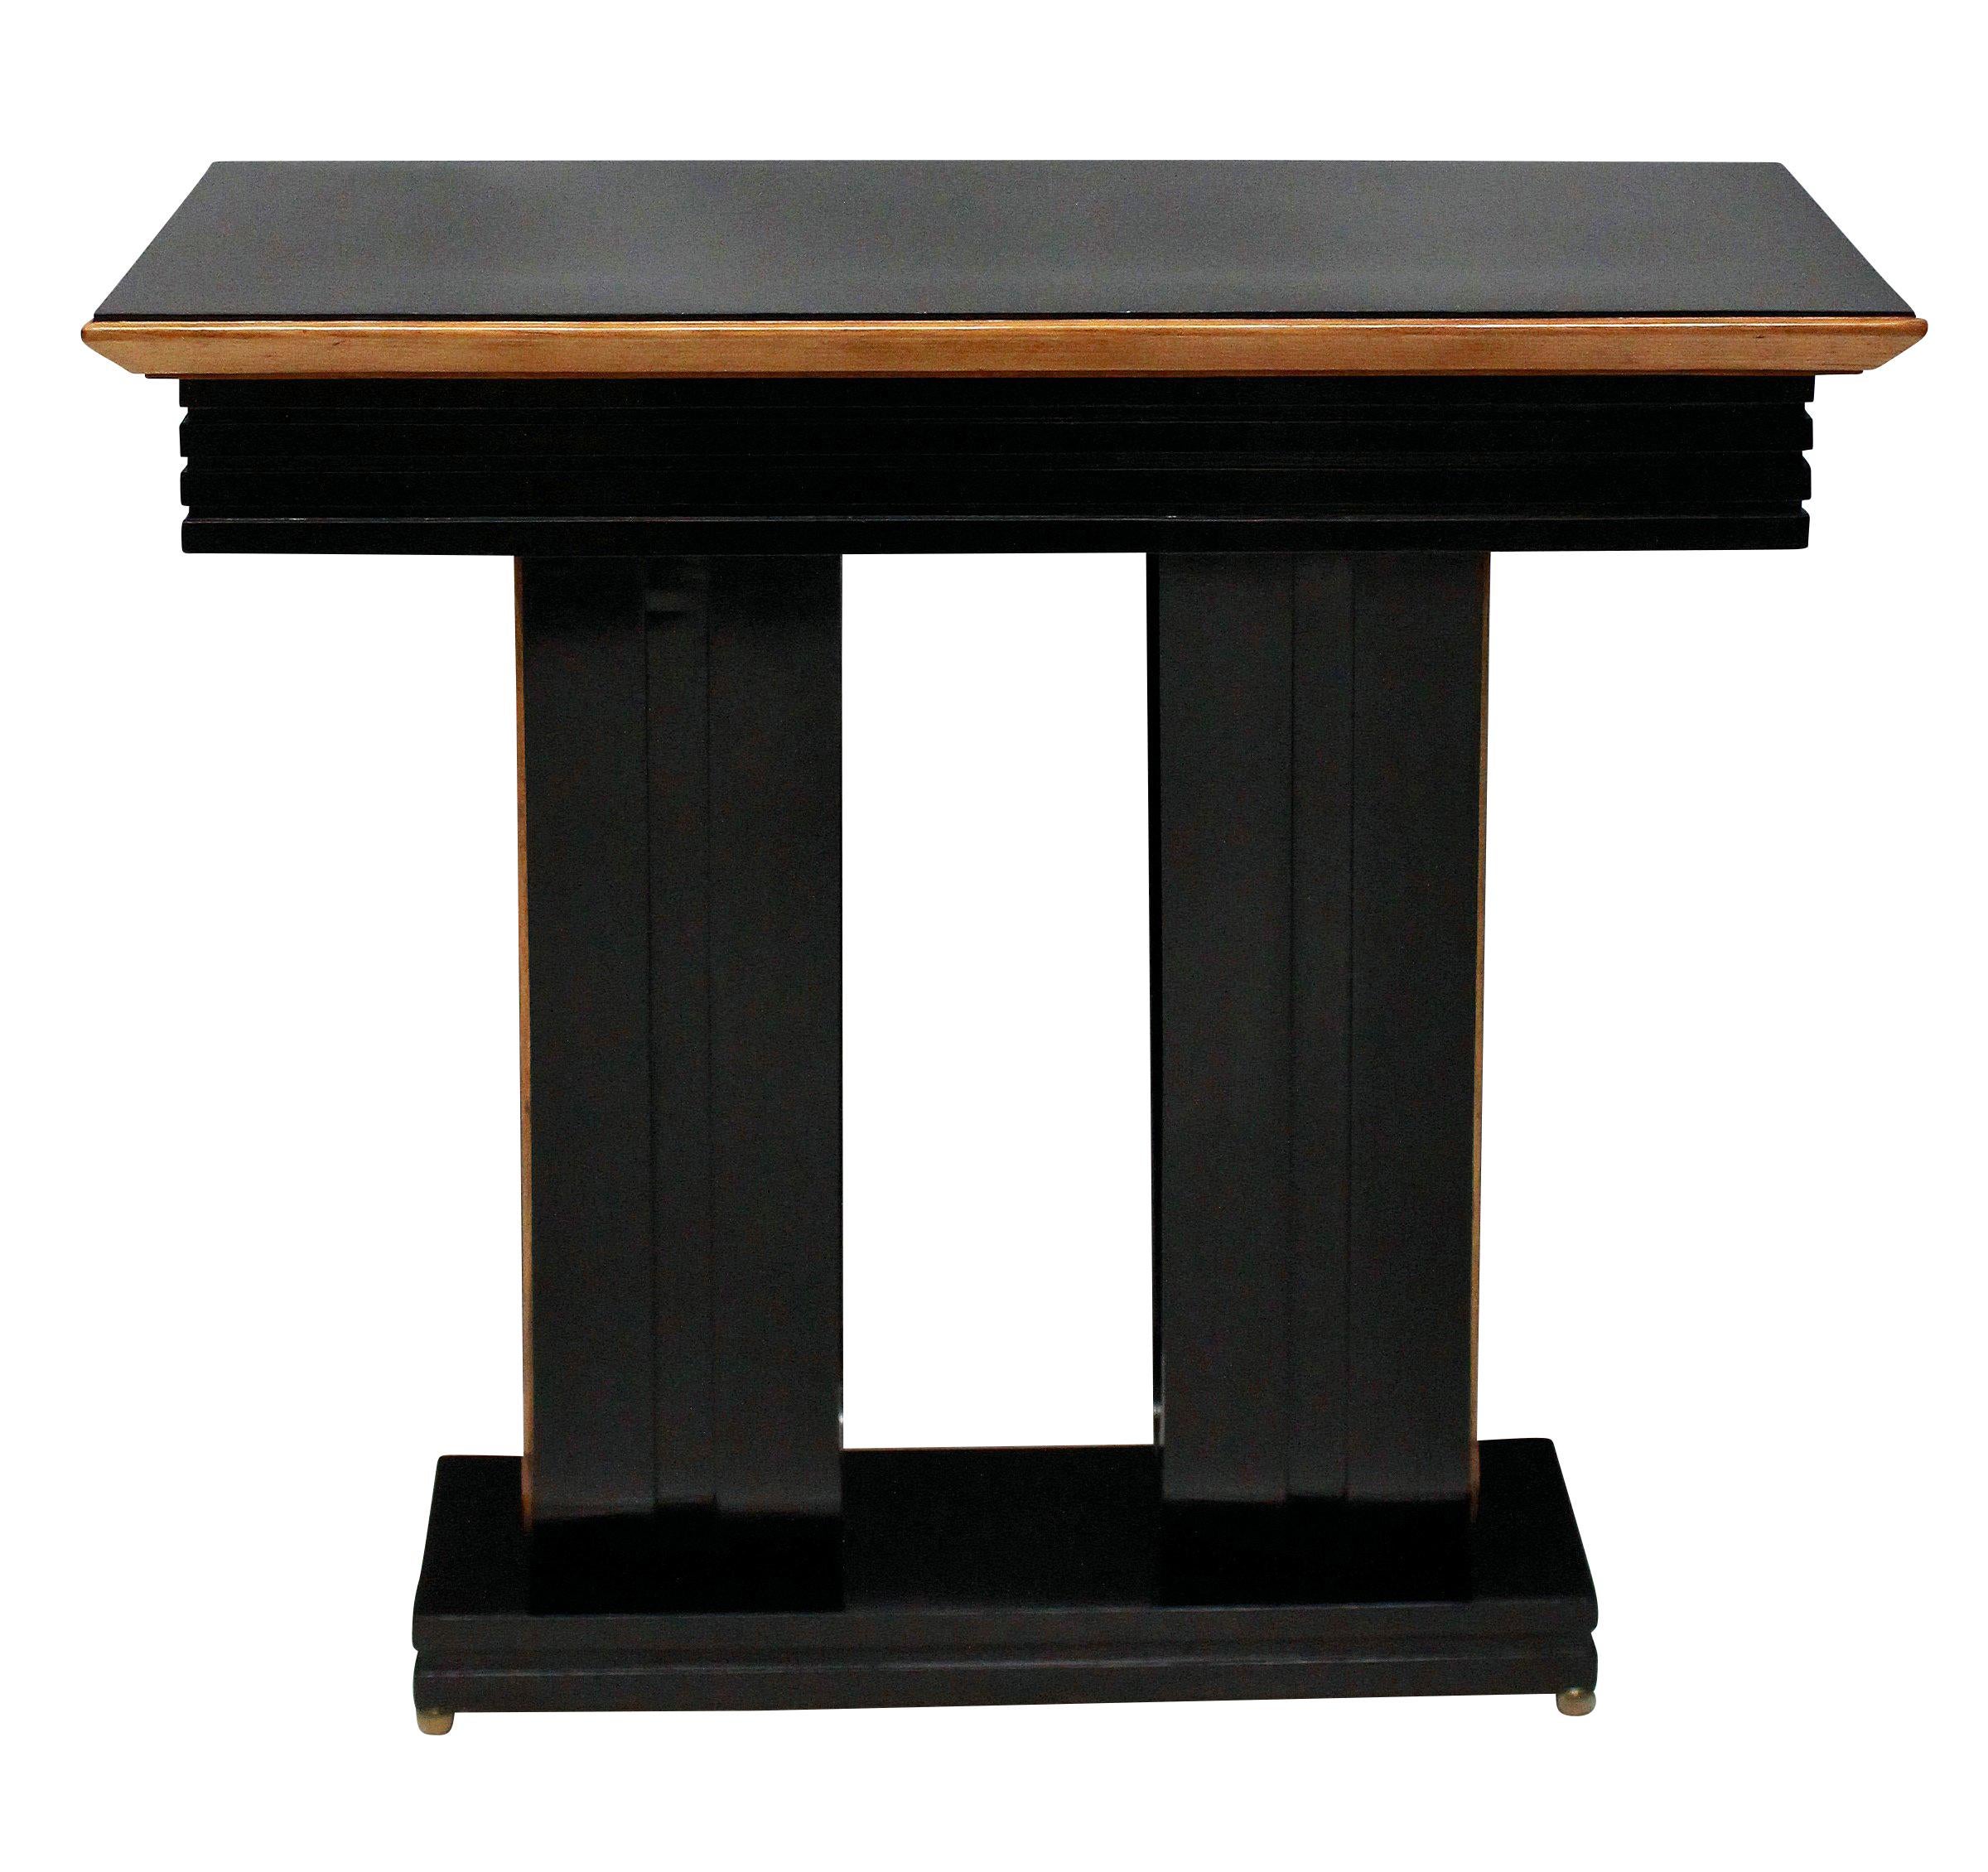 A pair of stylish Italian ebonized console tables, with lemon wood detailing and on brass ball feet.